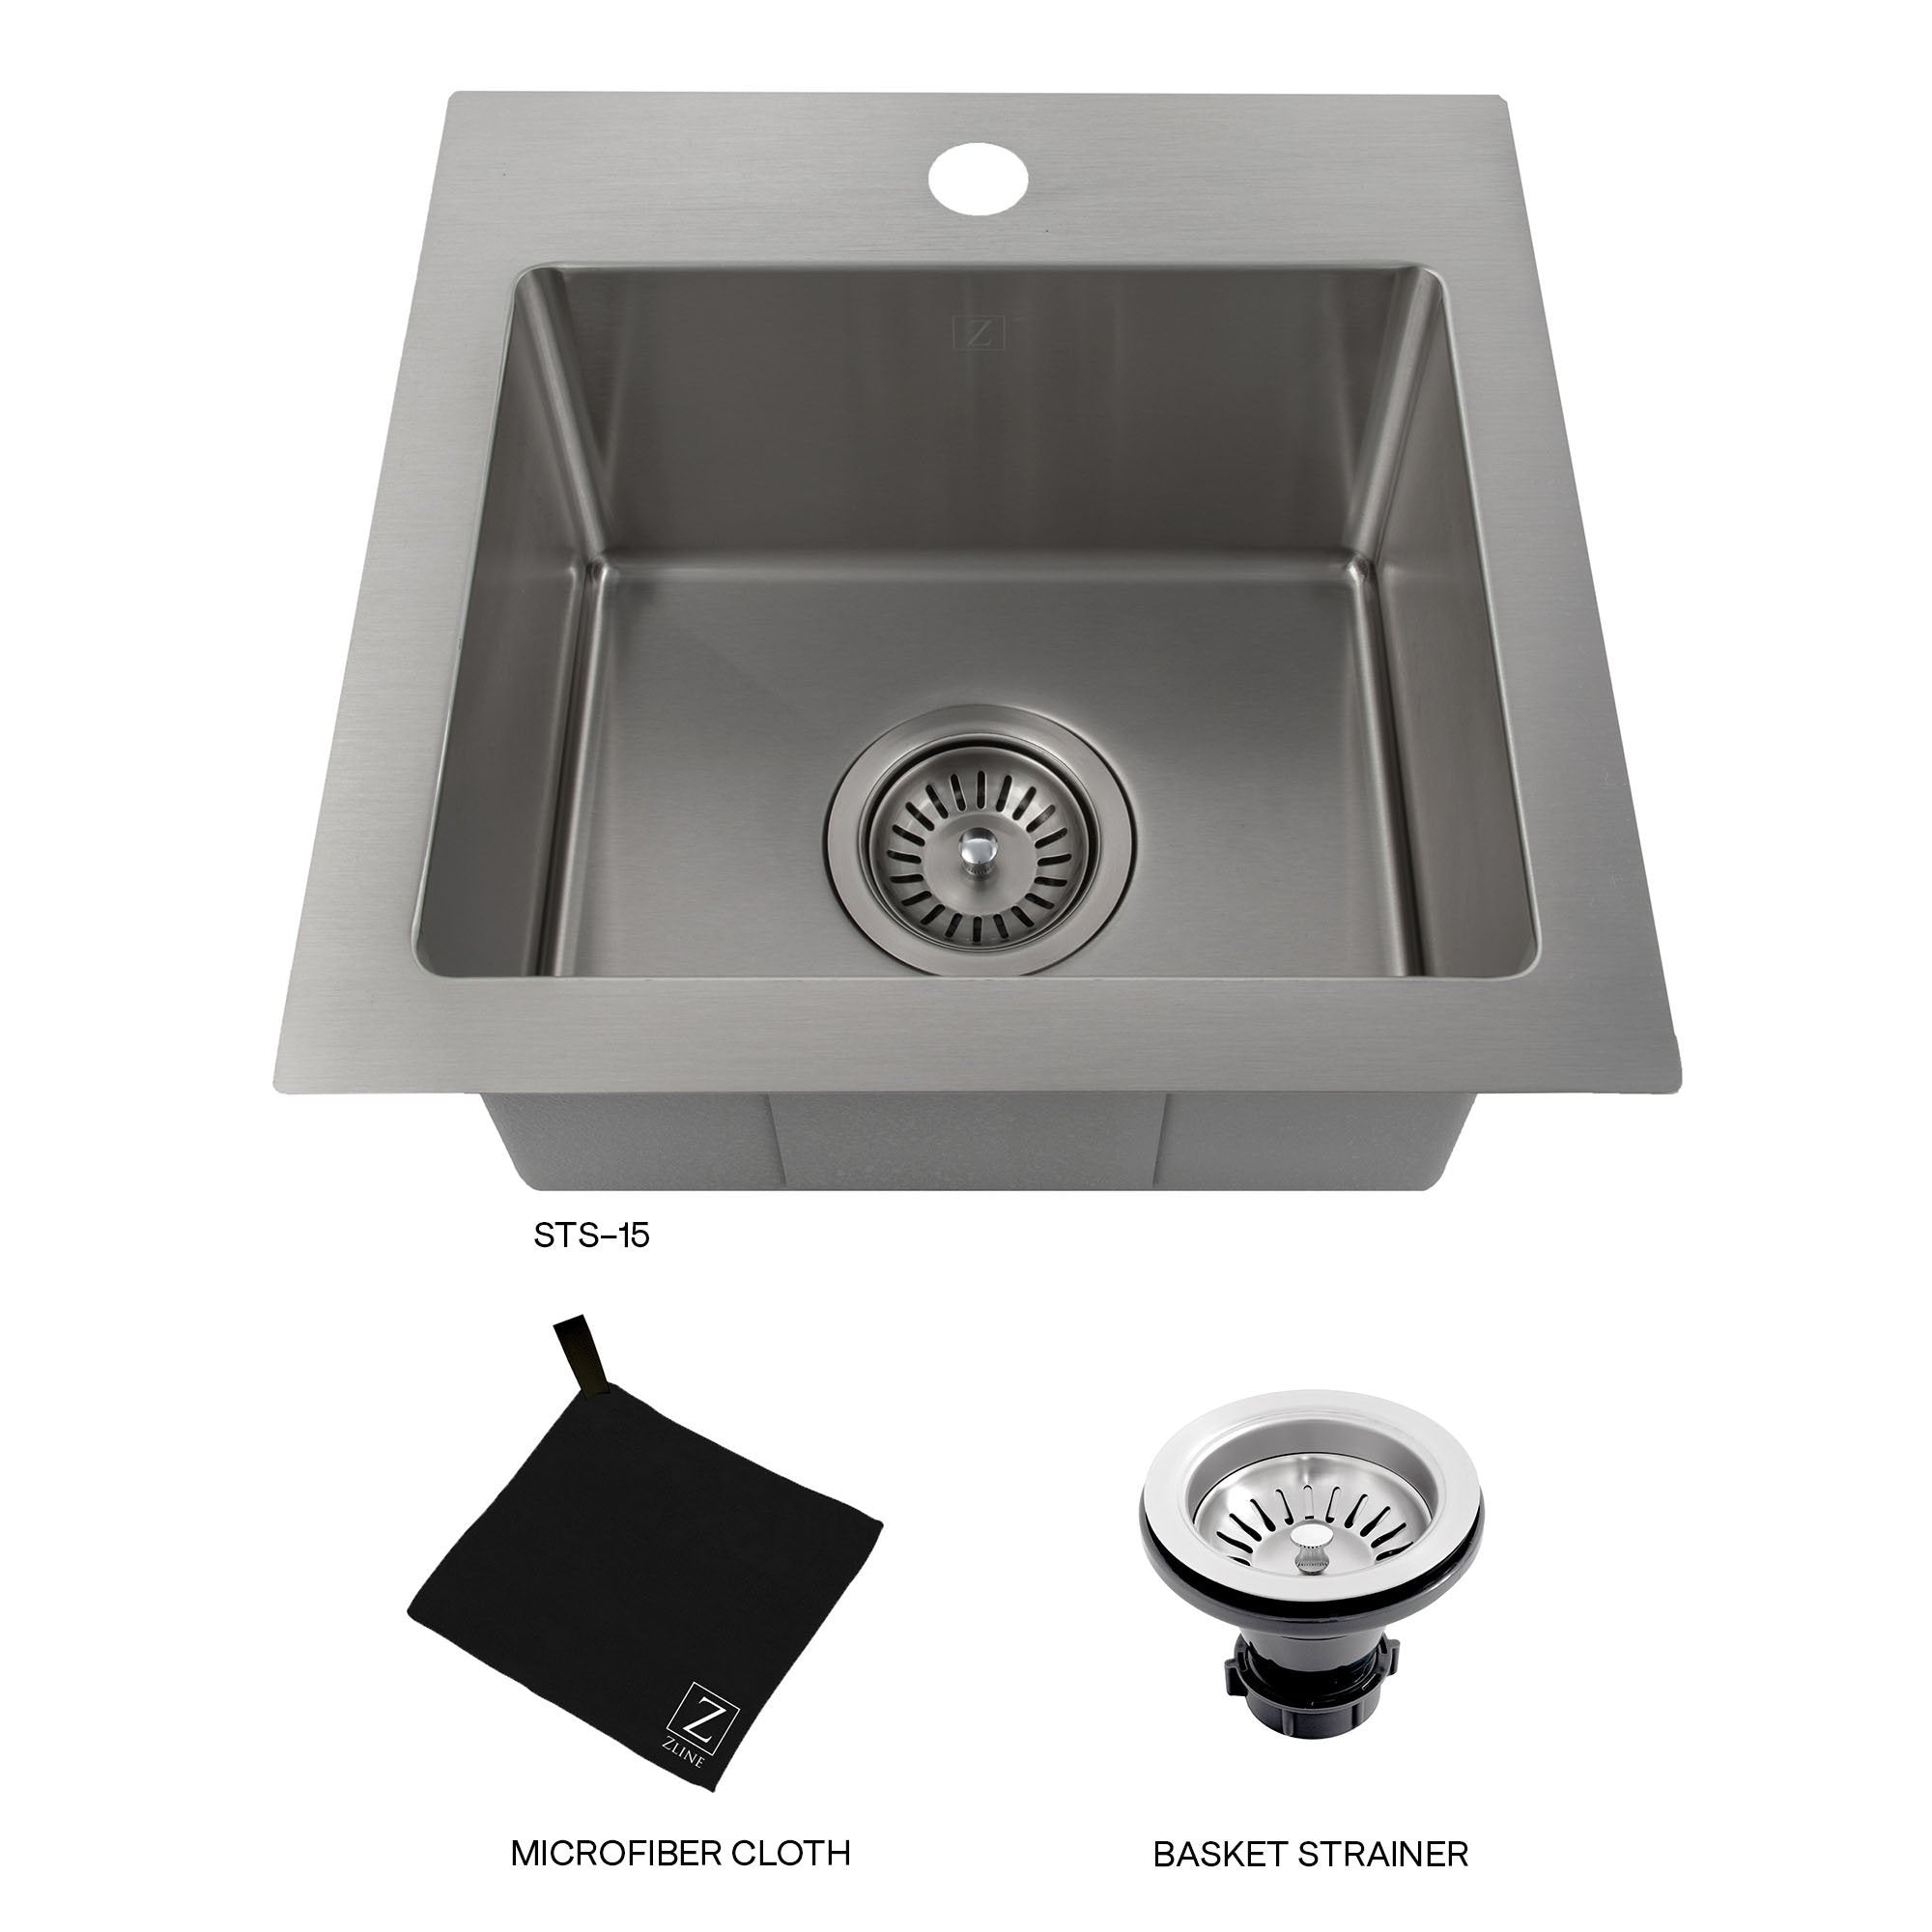 ZLINE 15-inch topmount sink with included microfiber cloth and basket strainer